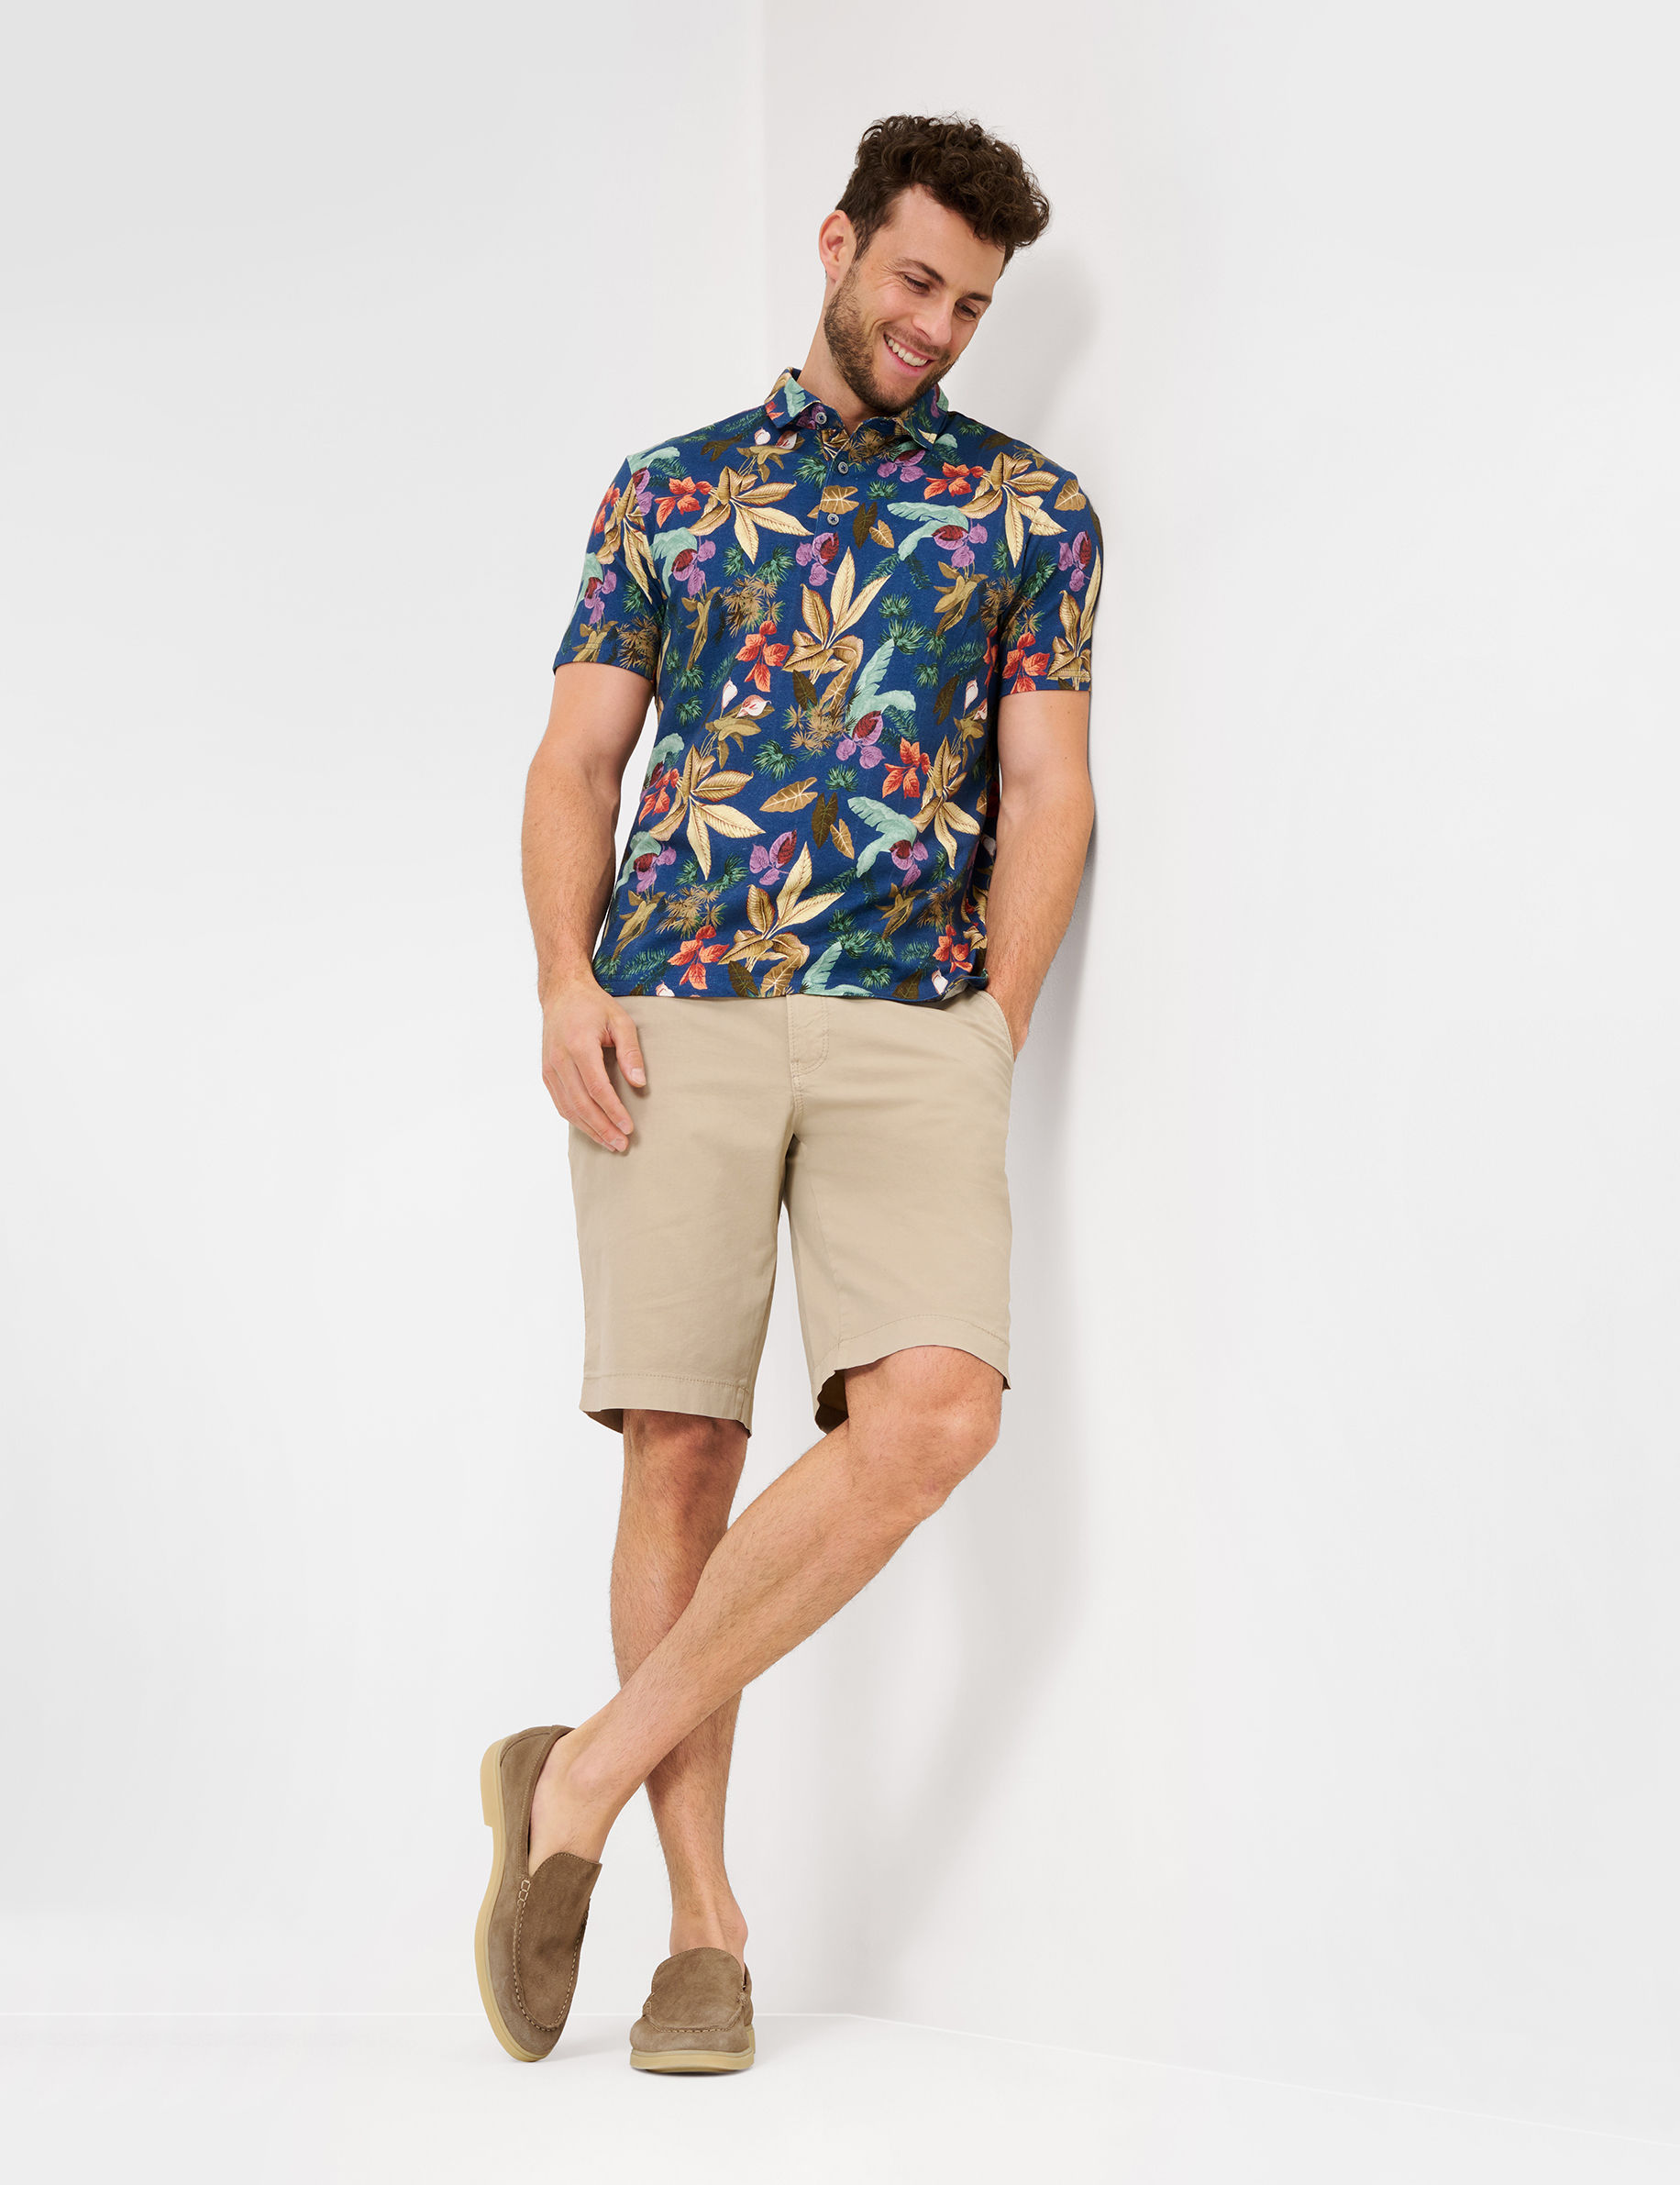 Men Style PICO cove  Model Outfit